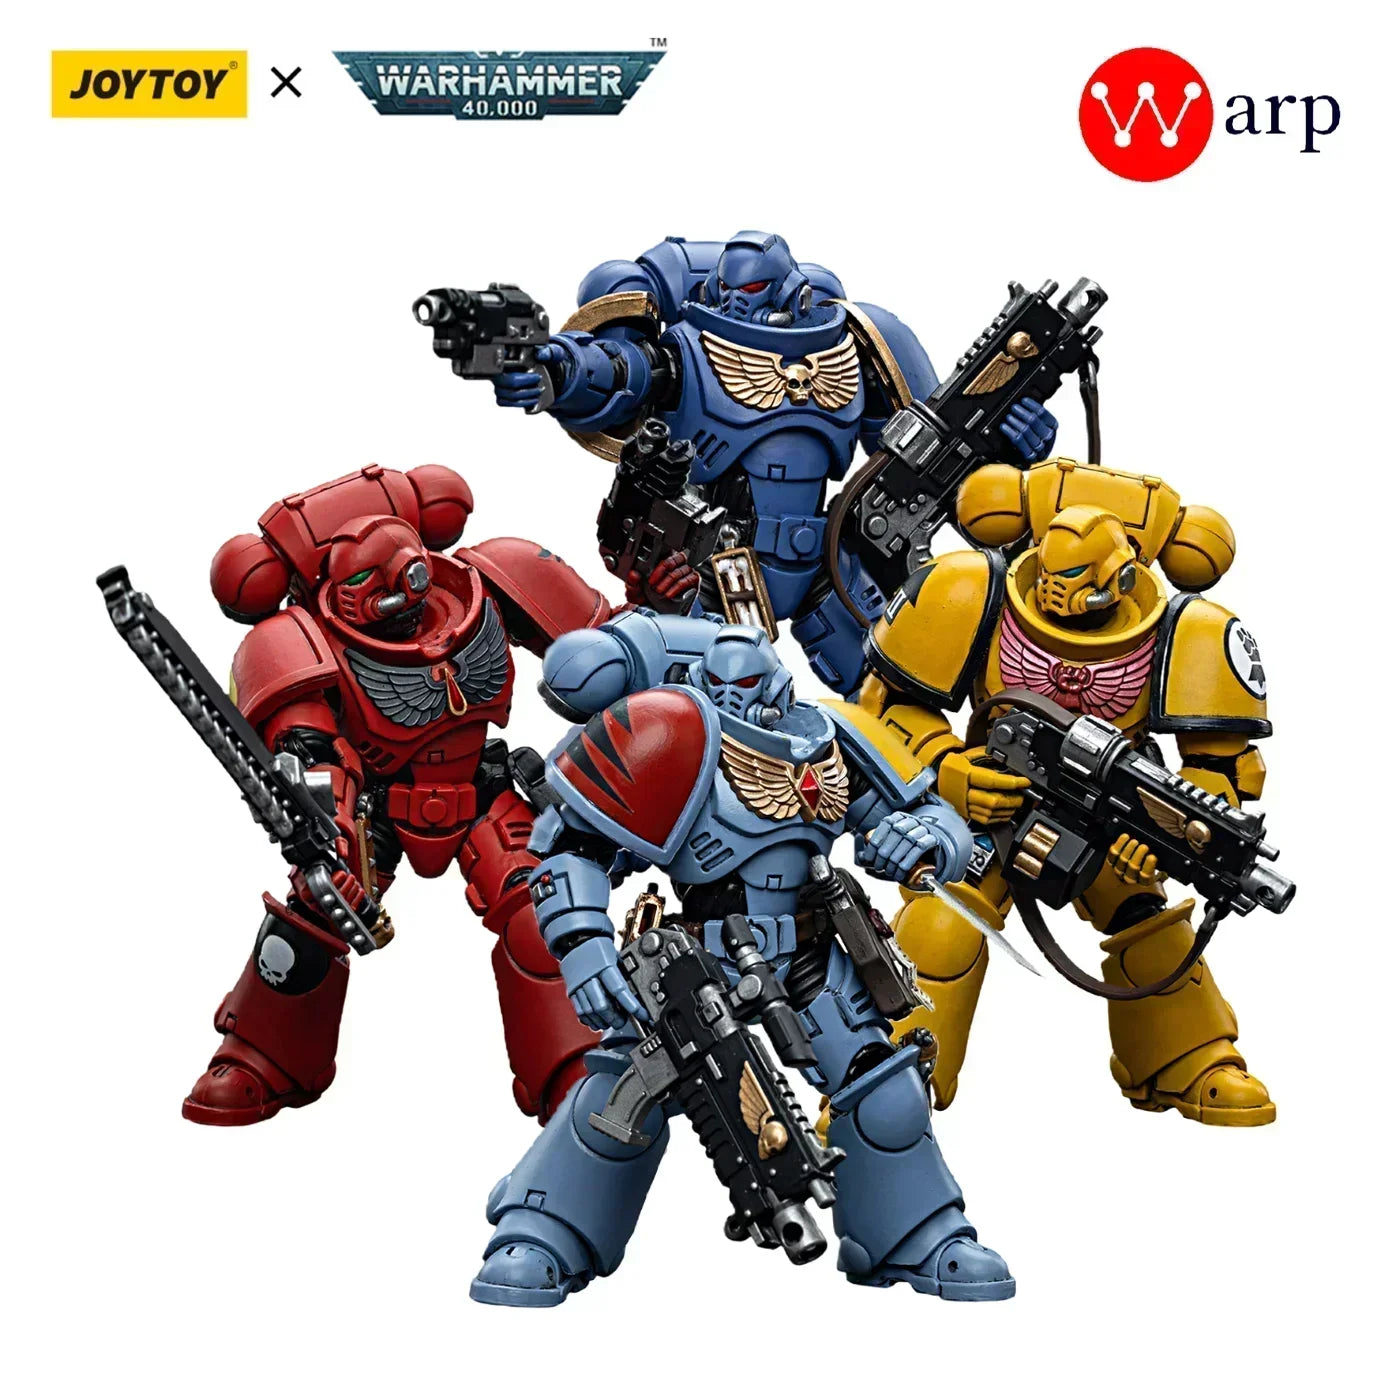 JOYTOY Warhammer 40k 1/18 Action Figure Space Military Miniature Figurine Collectibles